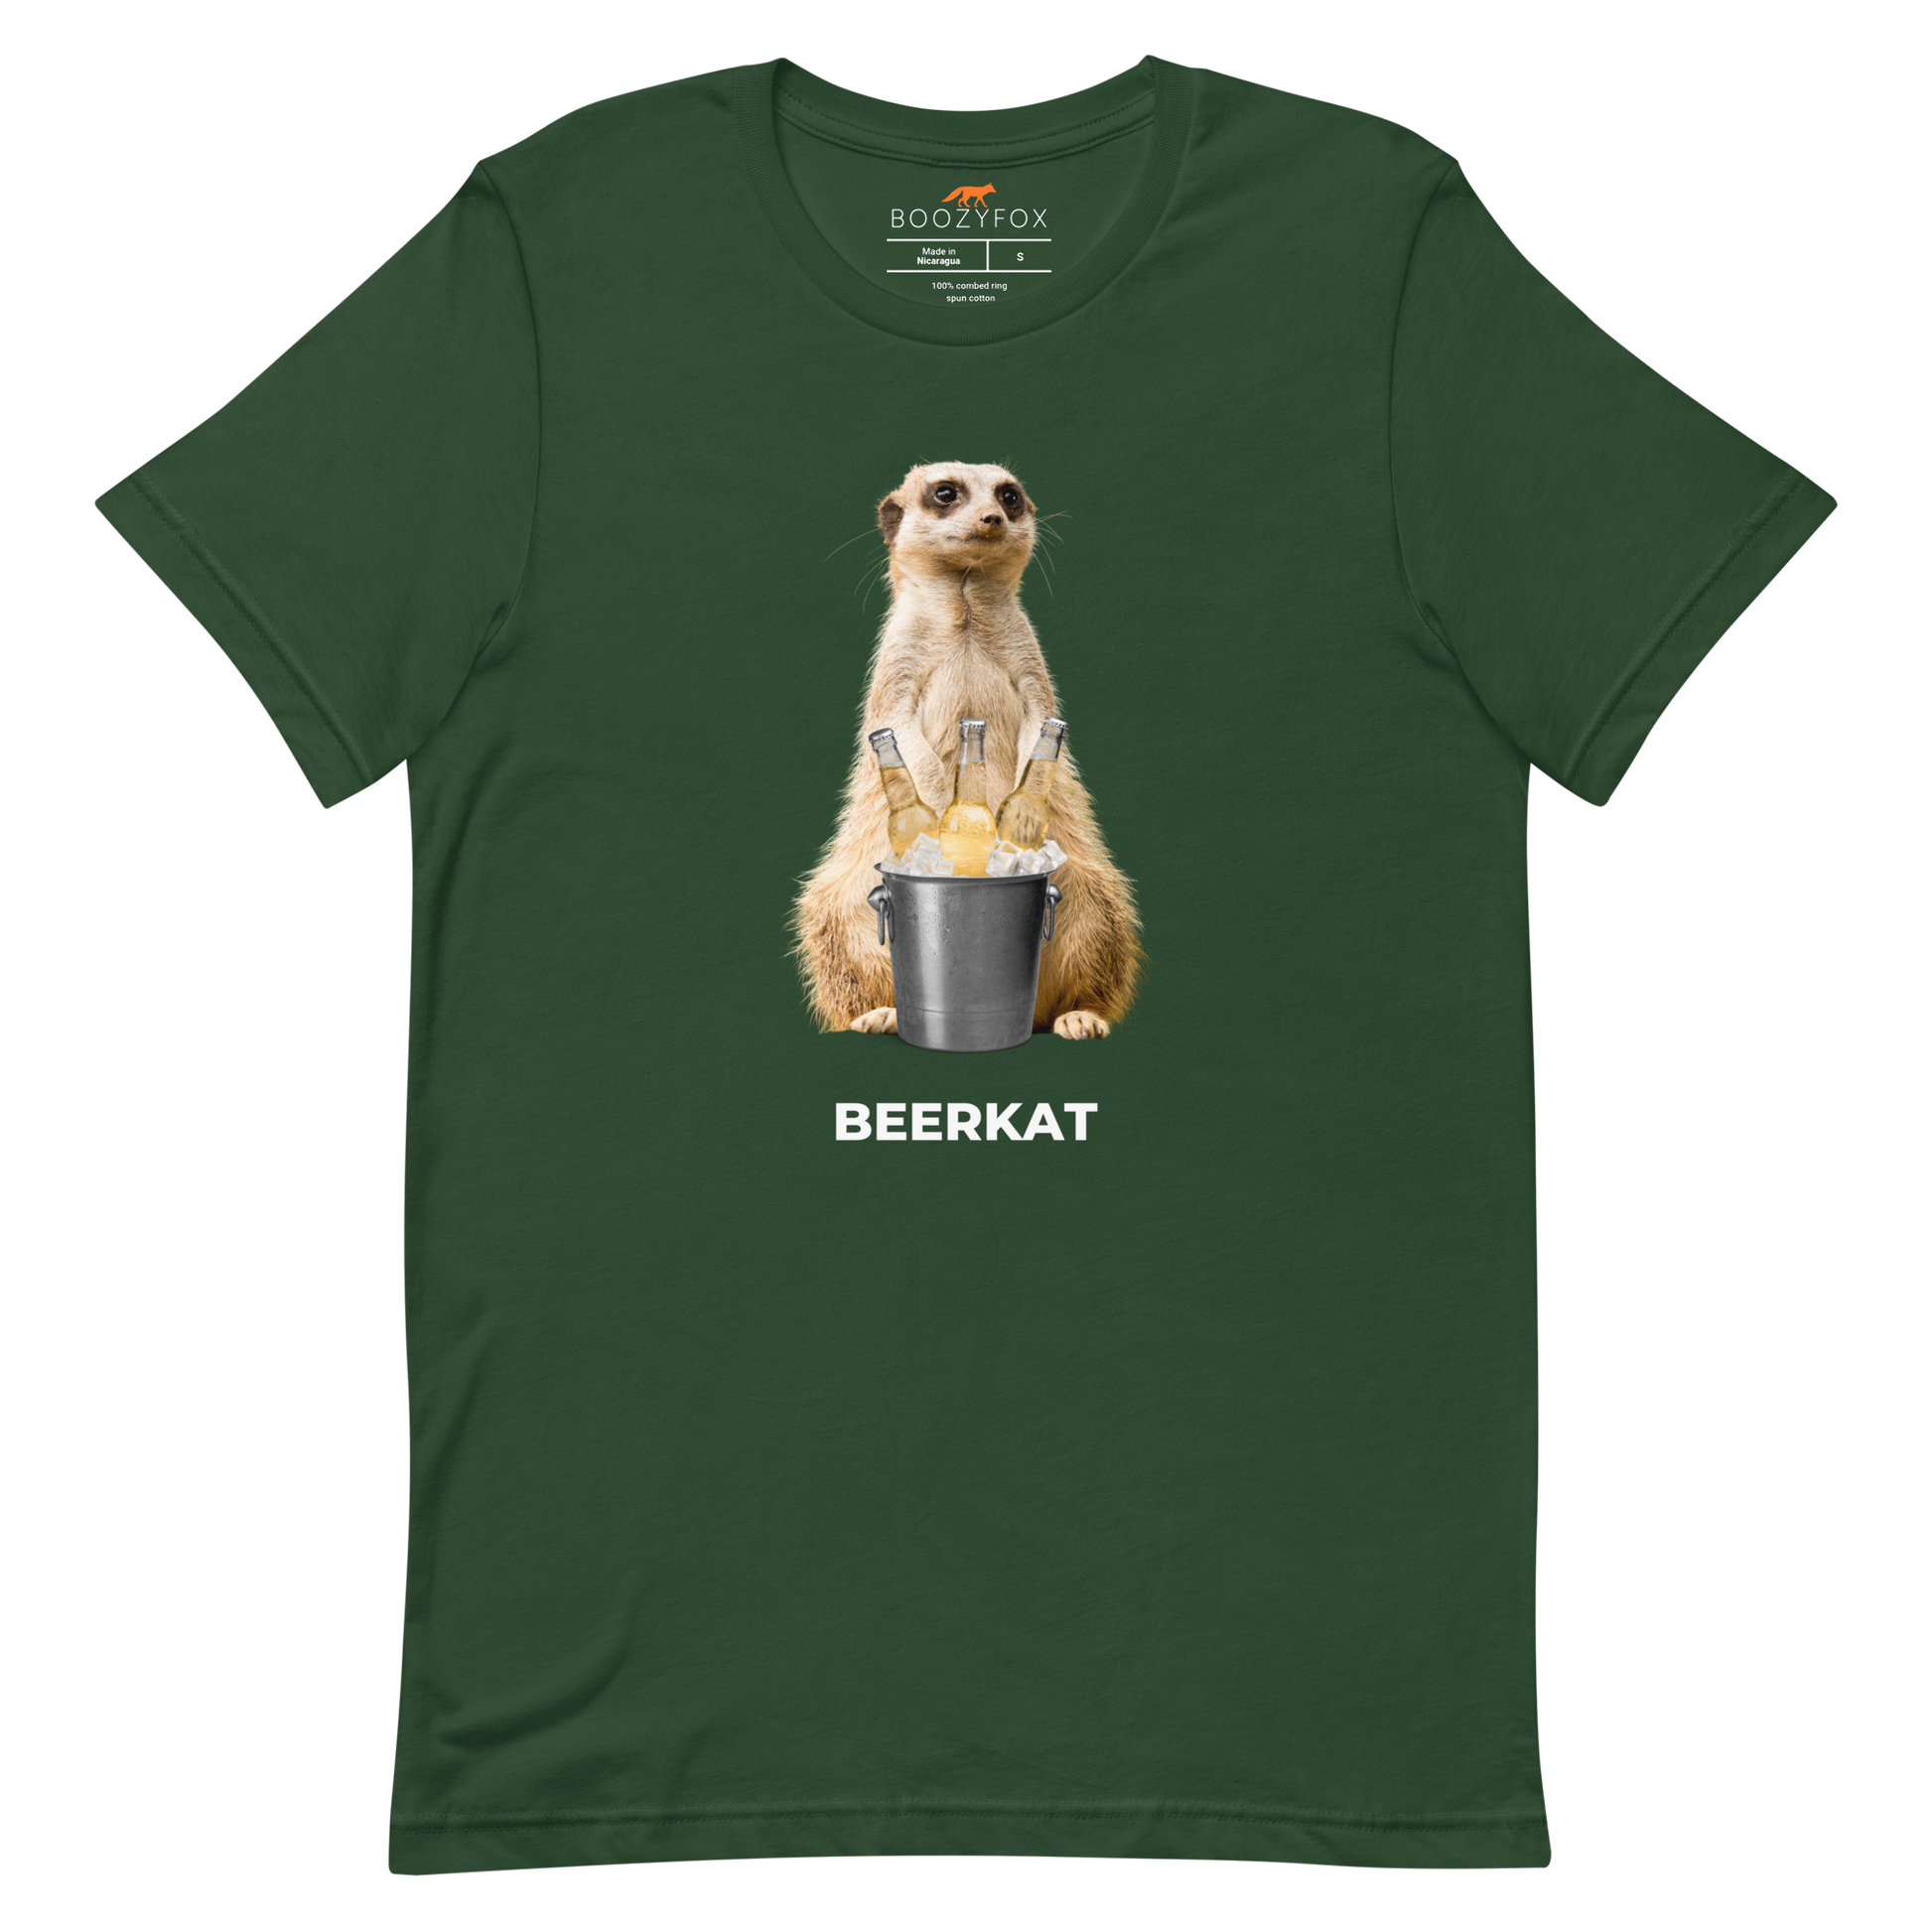 Forest Green Premium Meerkat T-Shirt featuring a hilarious Beerkat graphic on the chest - Funny Graphic Meerkat Tees - Boozy Fox